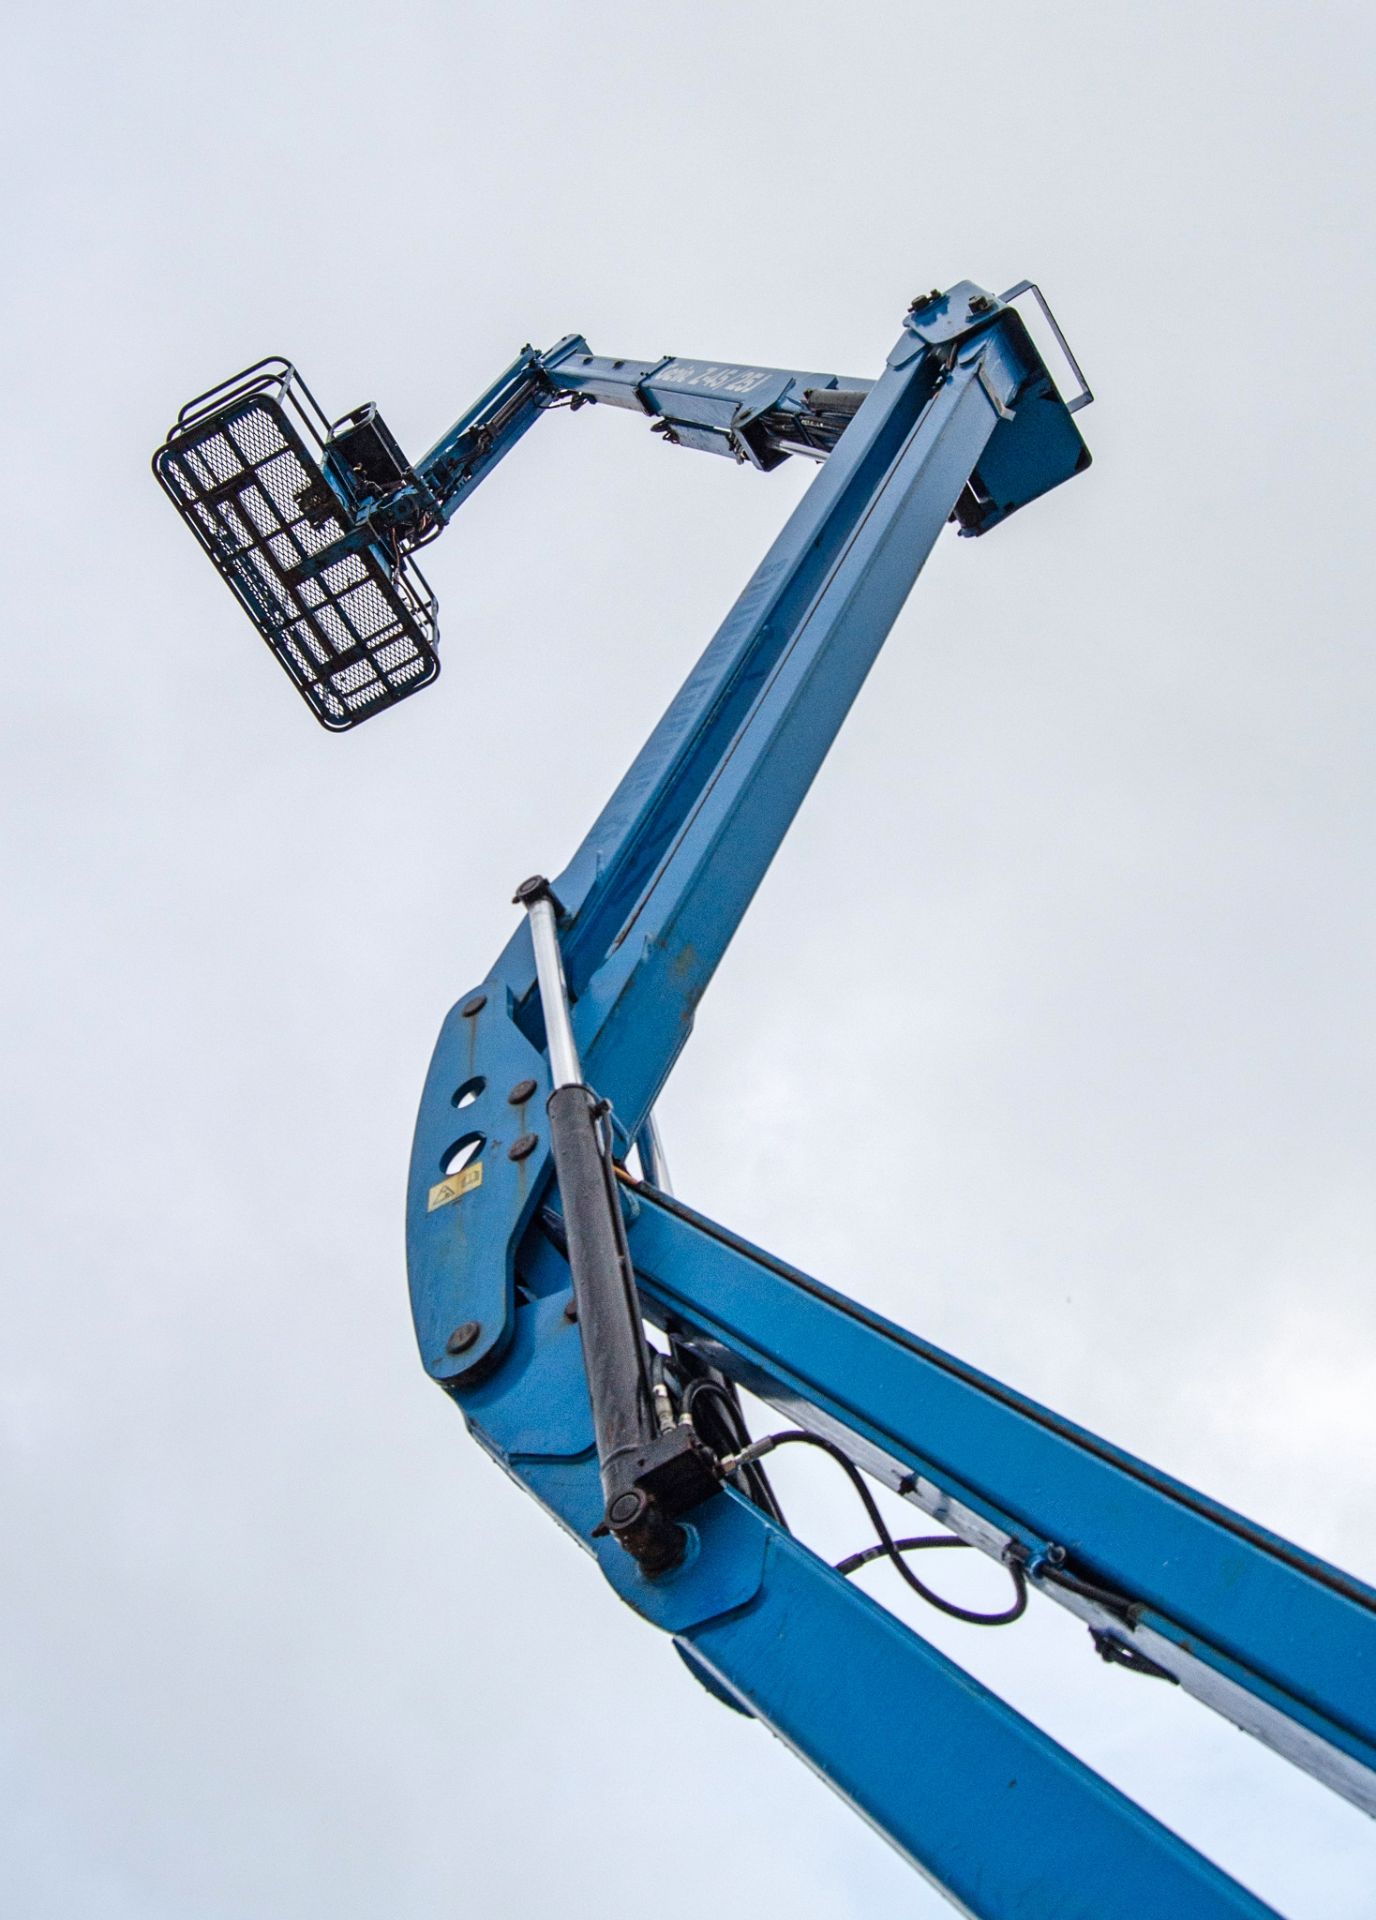 Genie Z45/25J diesel/battery electric 4 wheel drive articulated boom lift access platform Year: 2014 - Image 10 of 19